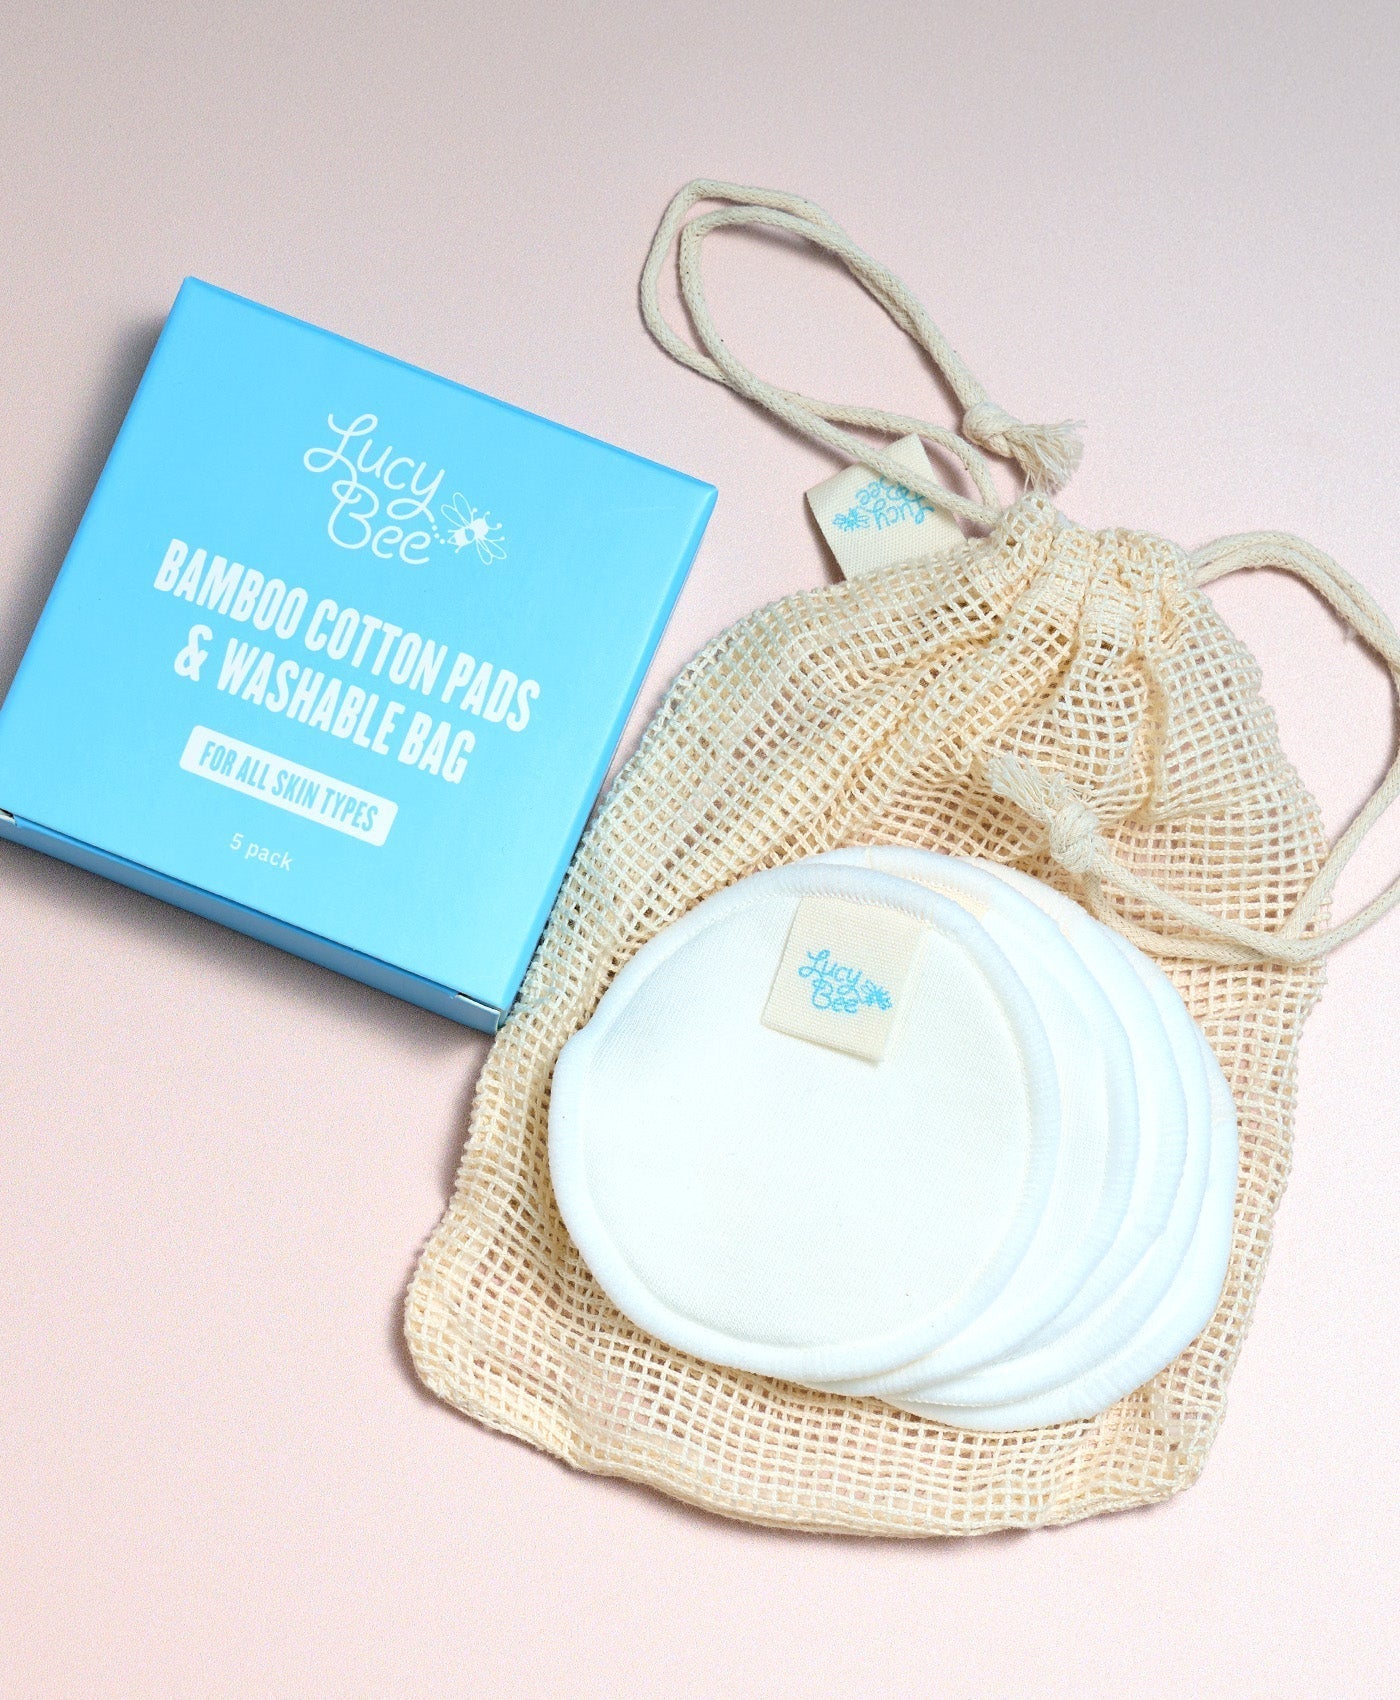 Organic Skincare Accessories by Lucy Bee